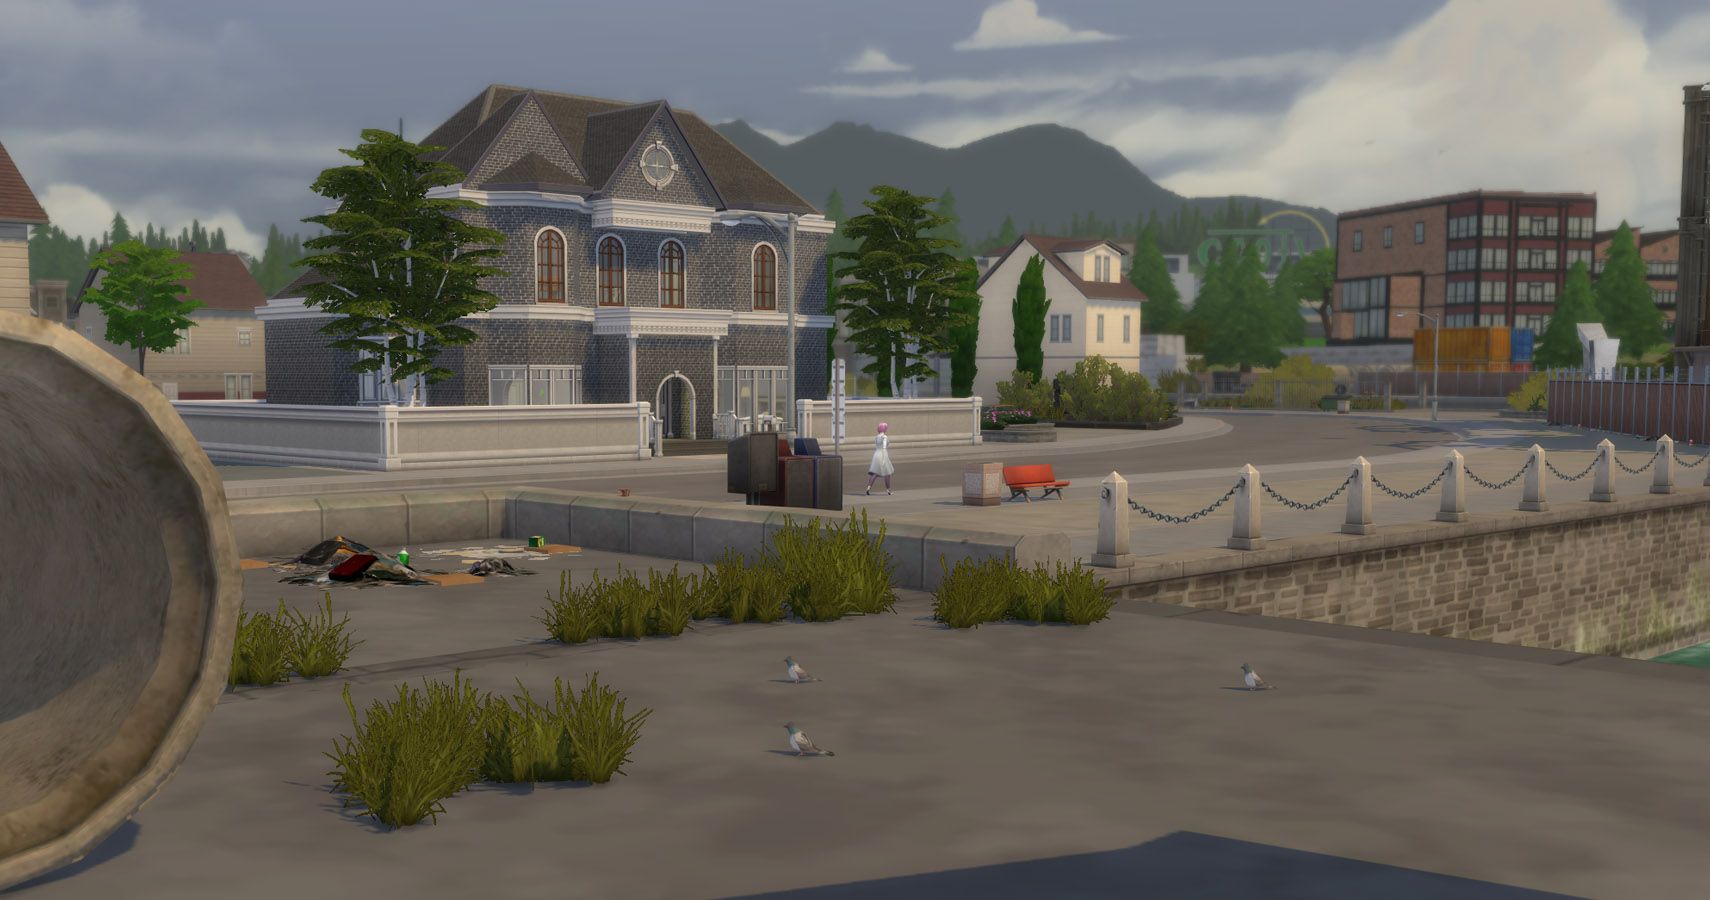 How I Destroyed The Eco Footprint Of Evergreen Harbor In The Sims 4 Eco Lifestyle